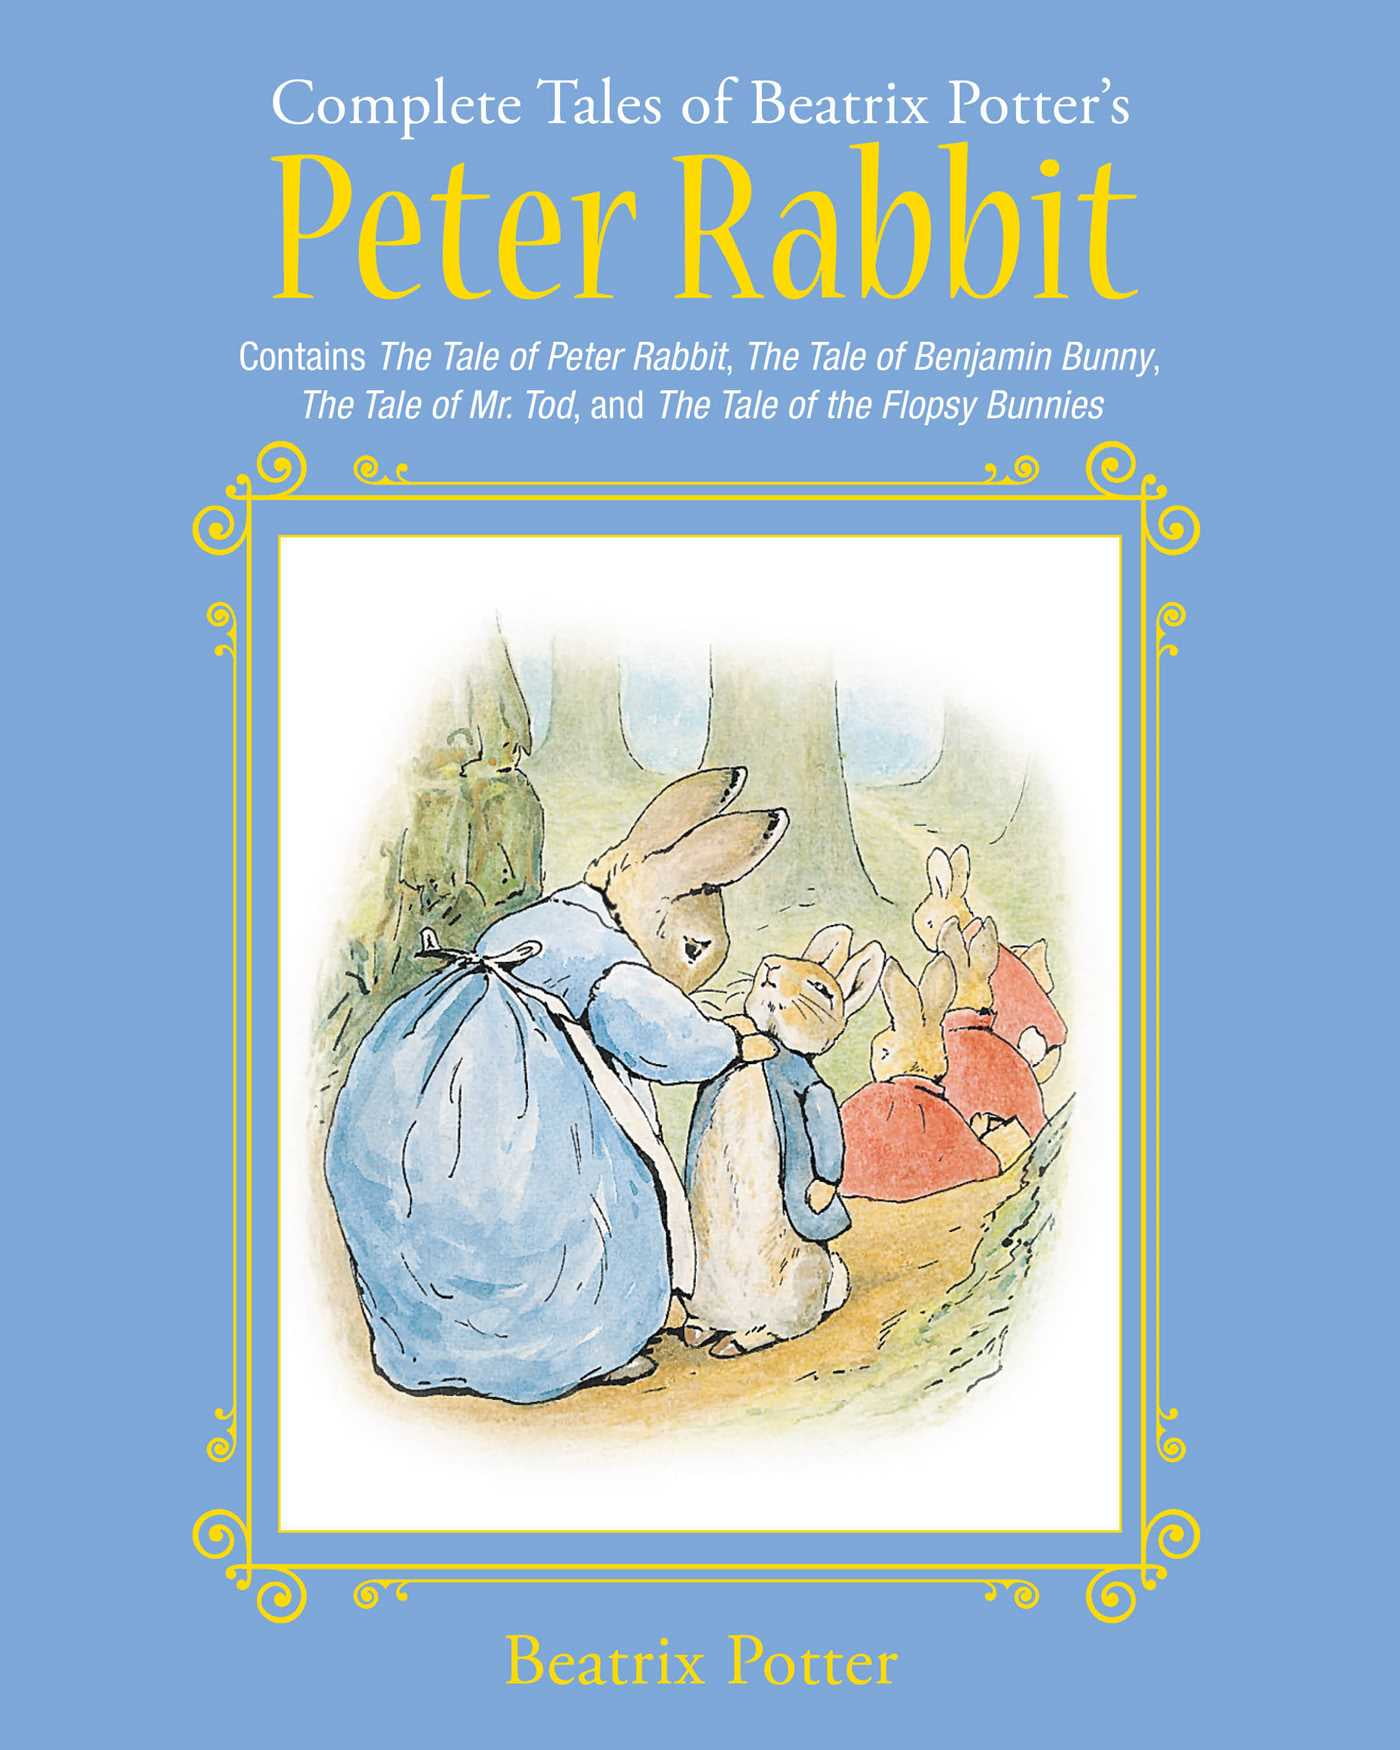 The Tale of Peter Rabbit (Paperback)